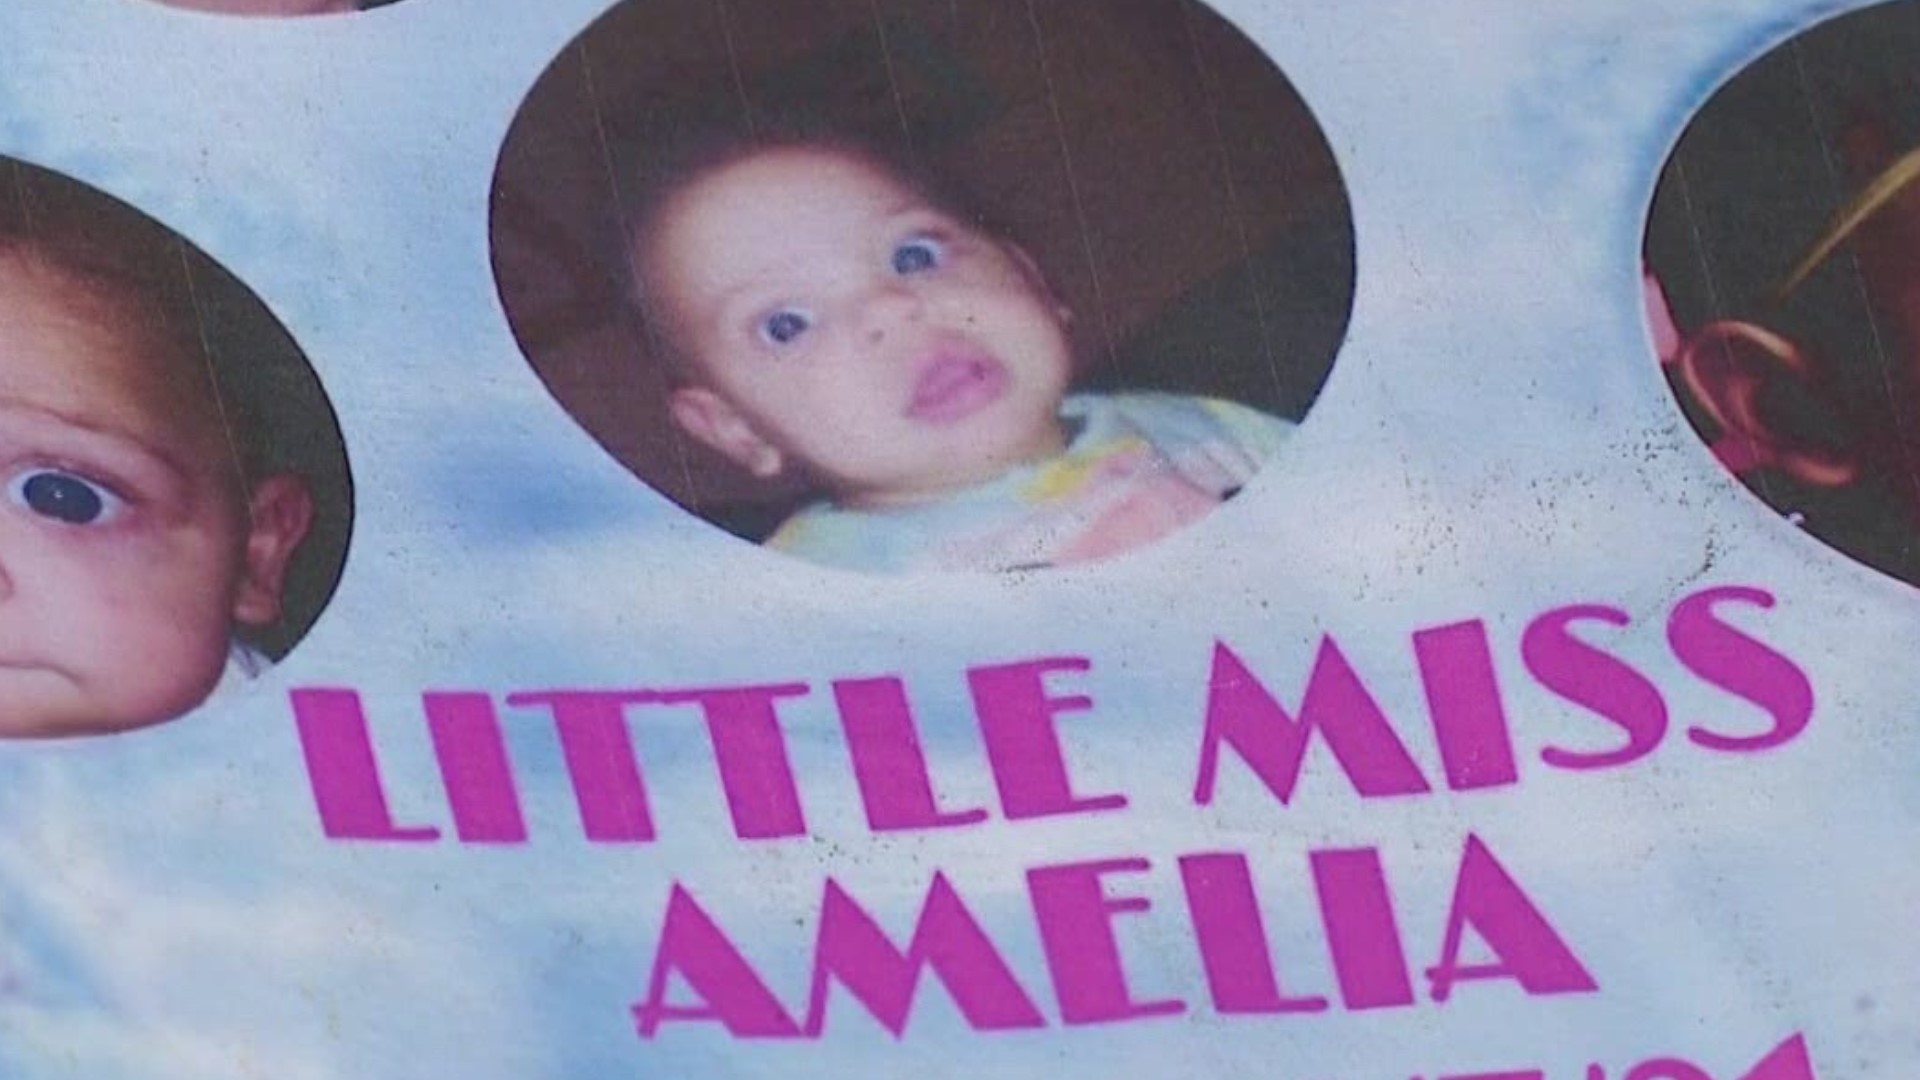 A grieving mother wants answers following the death of her 10-month-old.